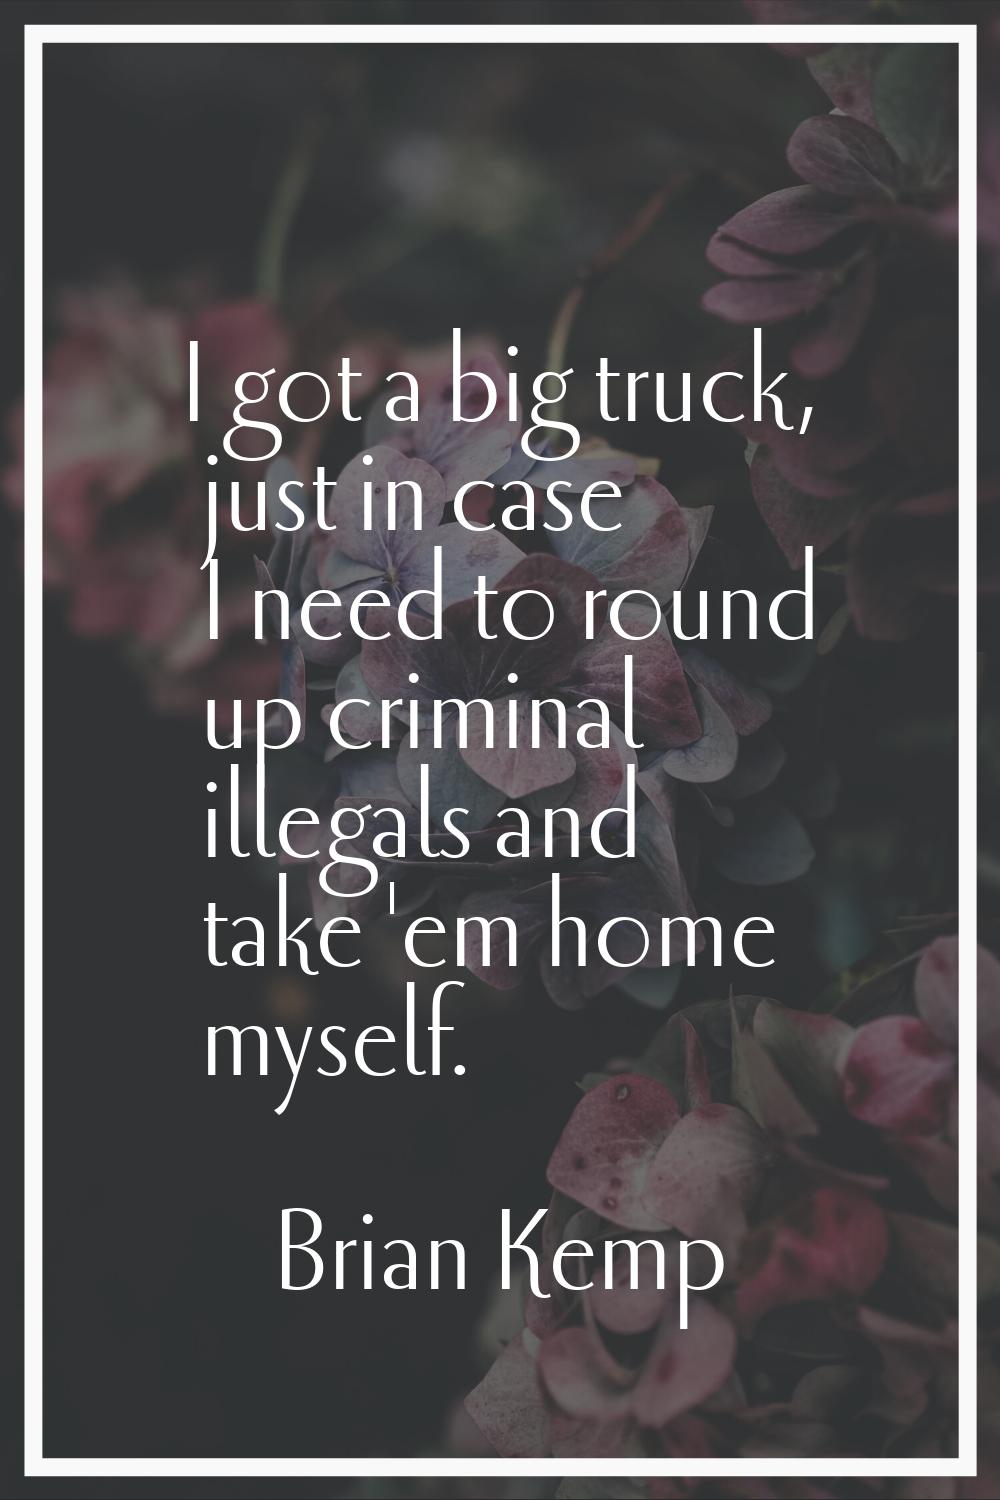 I got a big truck, just in case I need to round up criminal illegals and take 'em home myself.